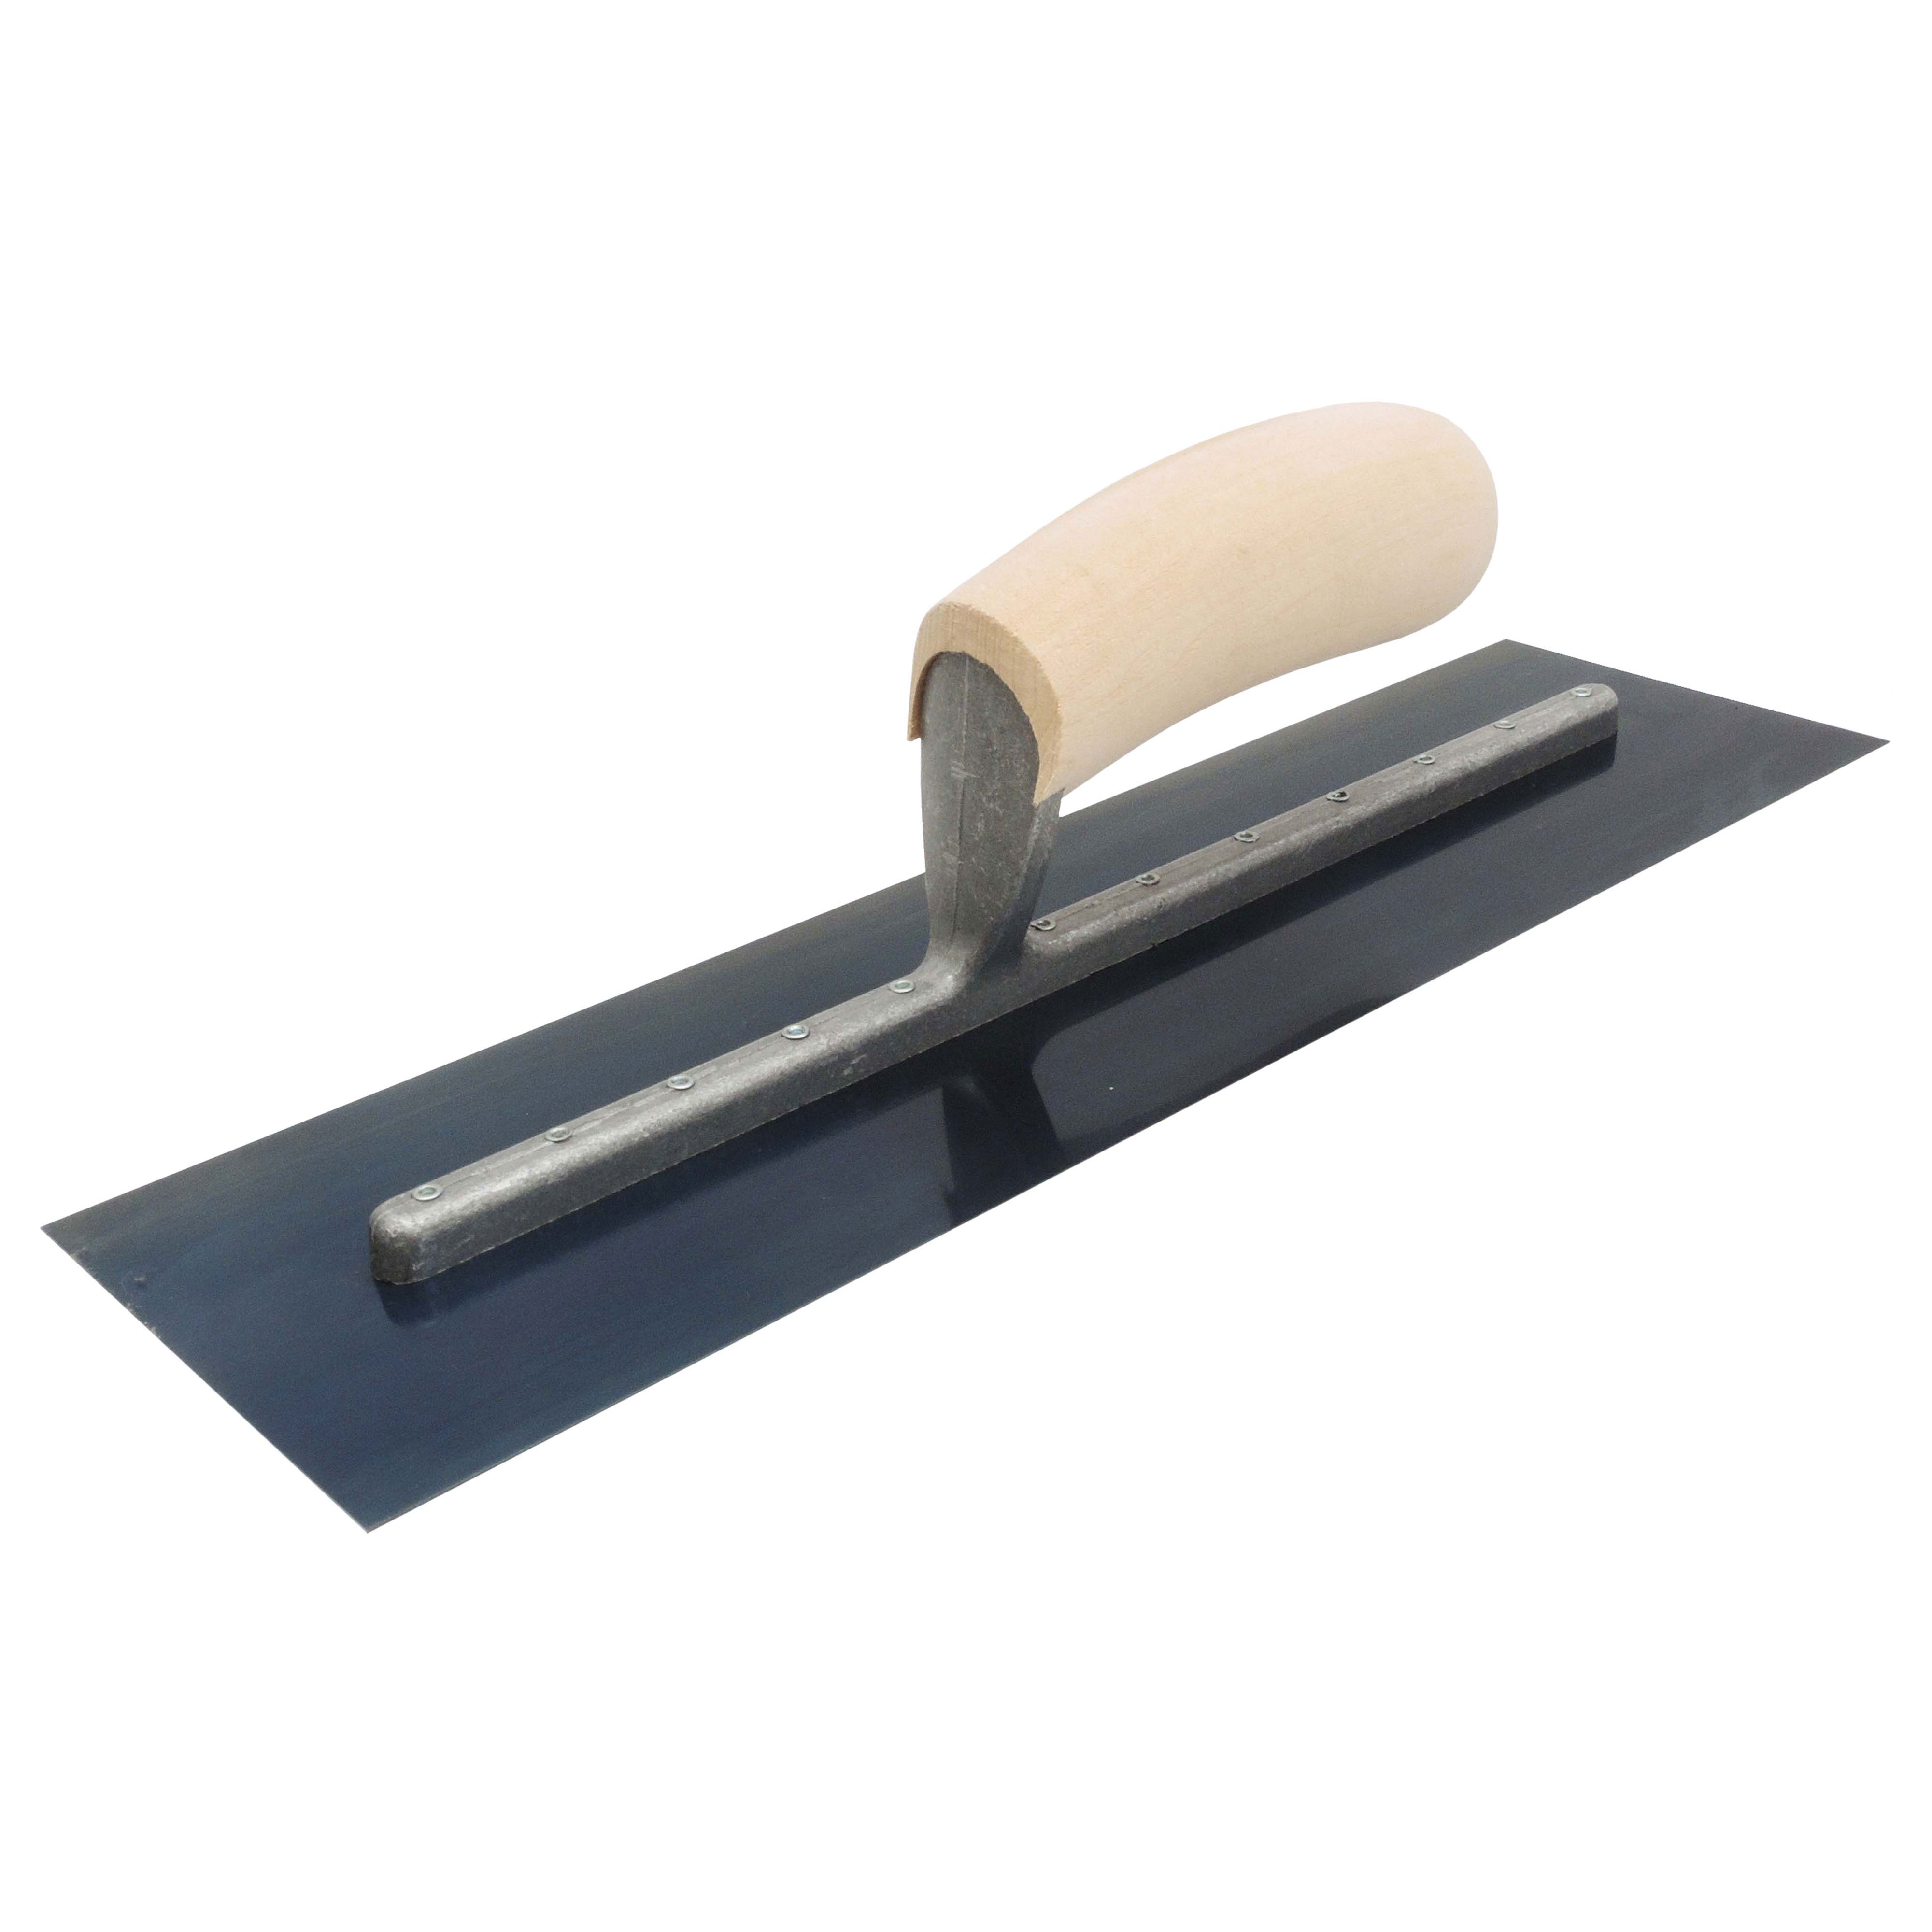 Marshalltown FT144B 14in x 4in Blue Steel Finishing Trowel with Wood Handle FT144B